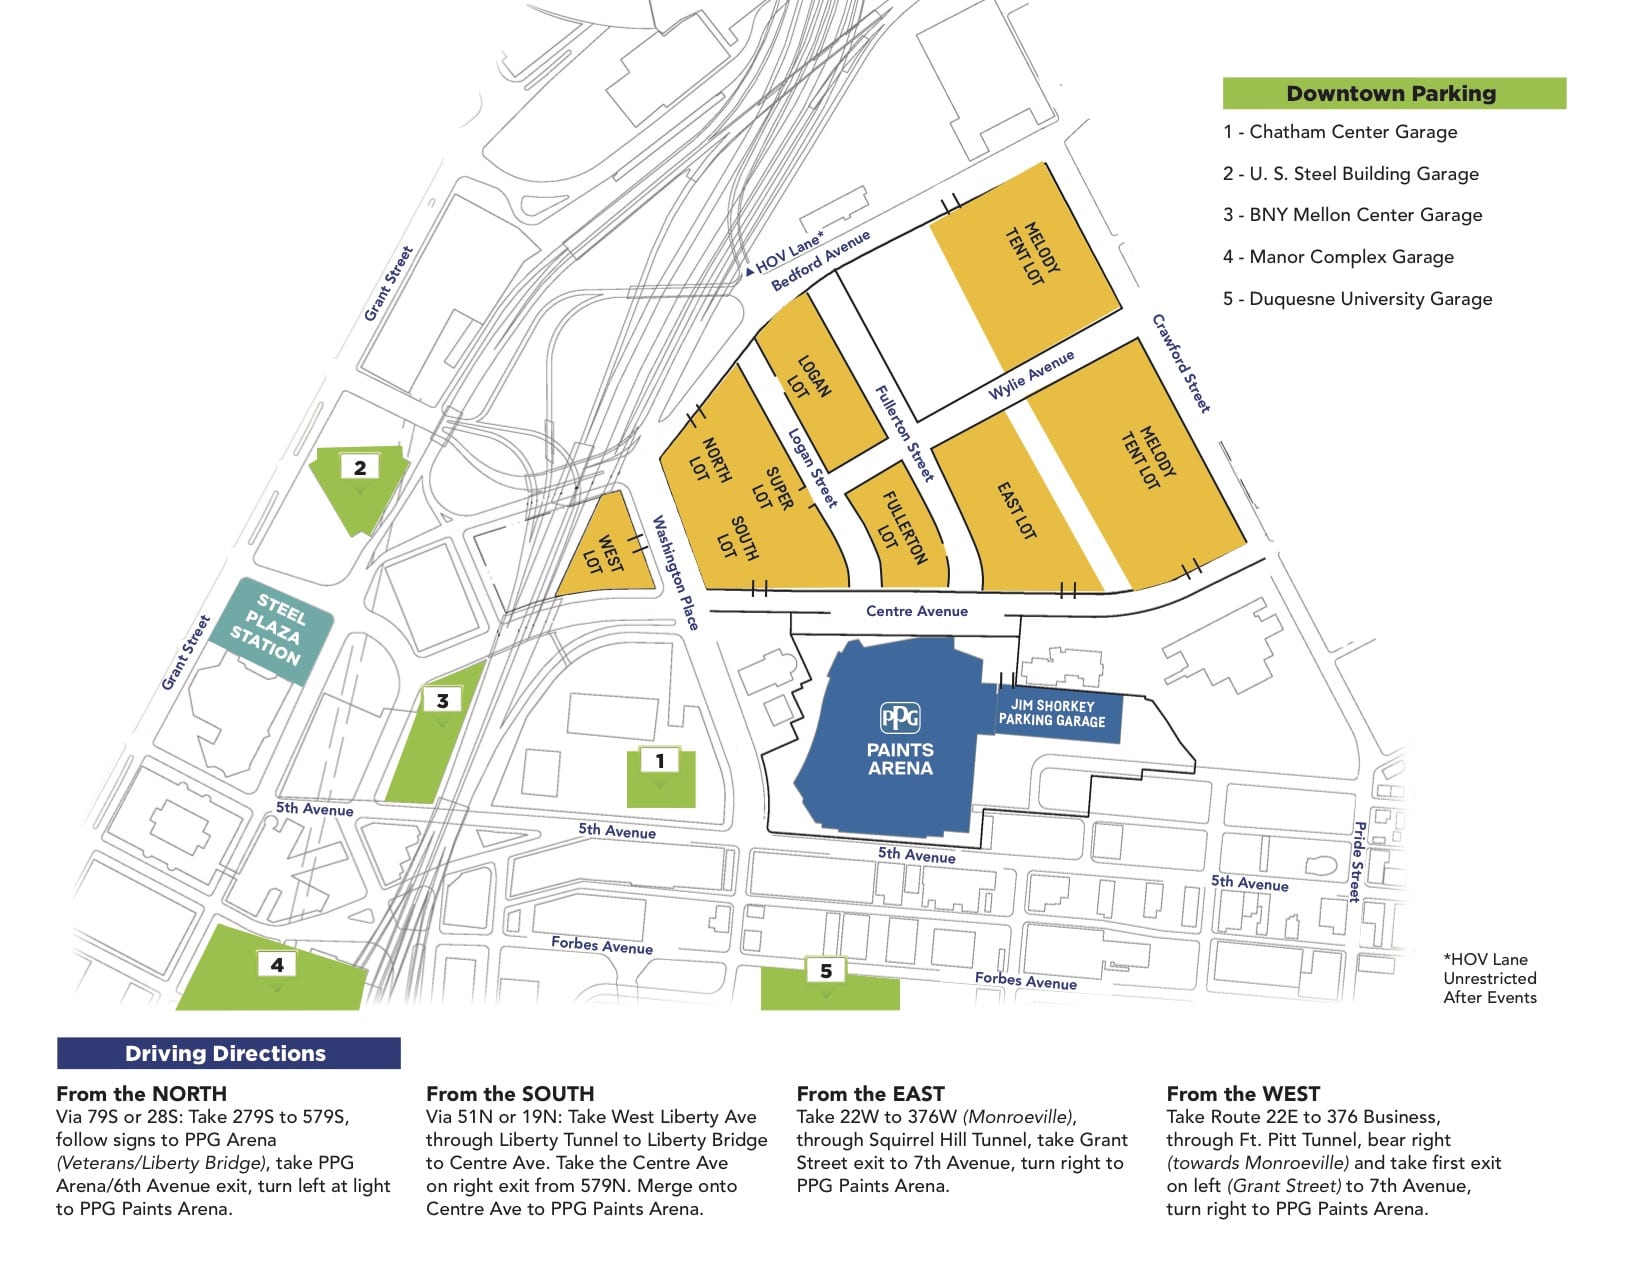 PPG Paints Arena Parking Guide: Tips, Maps, Deals | SPG